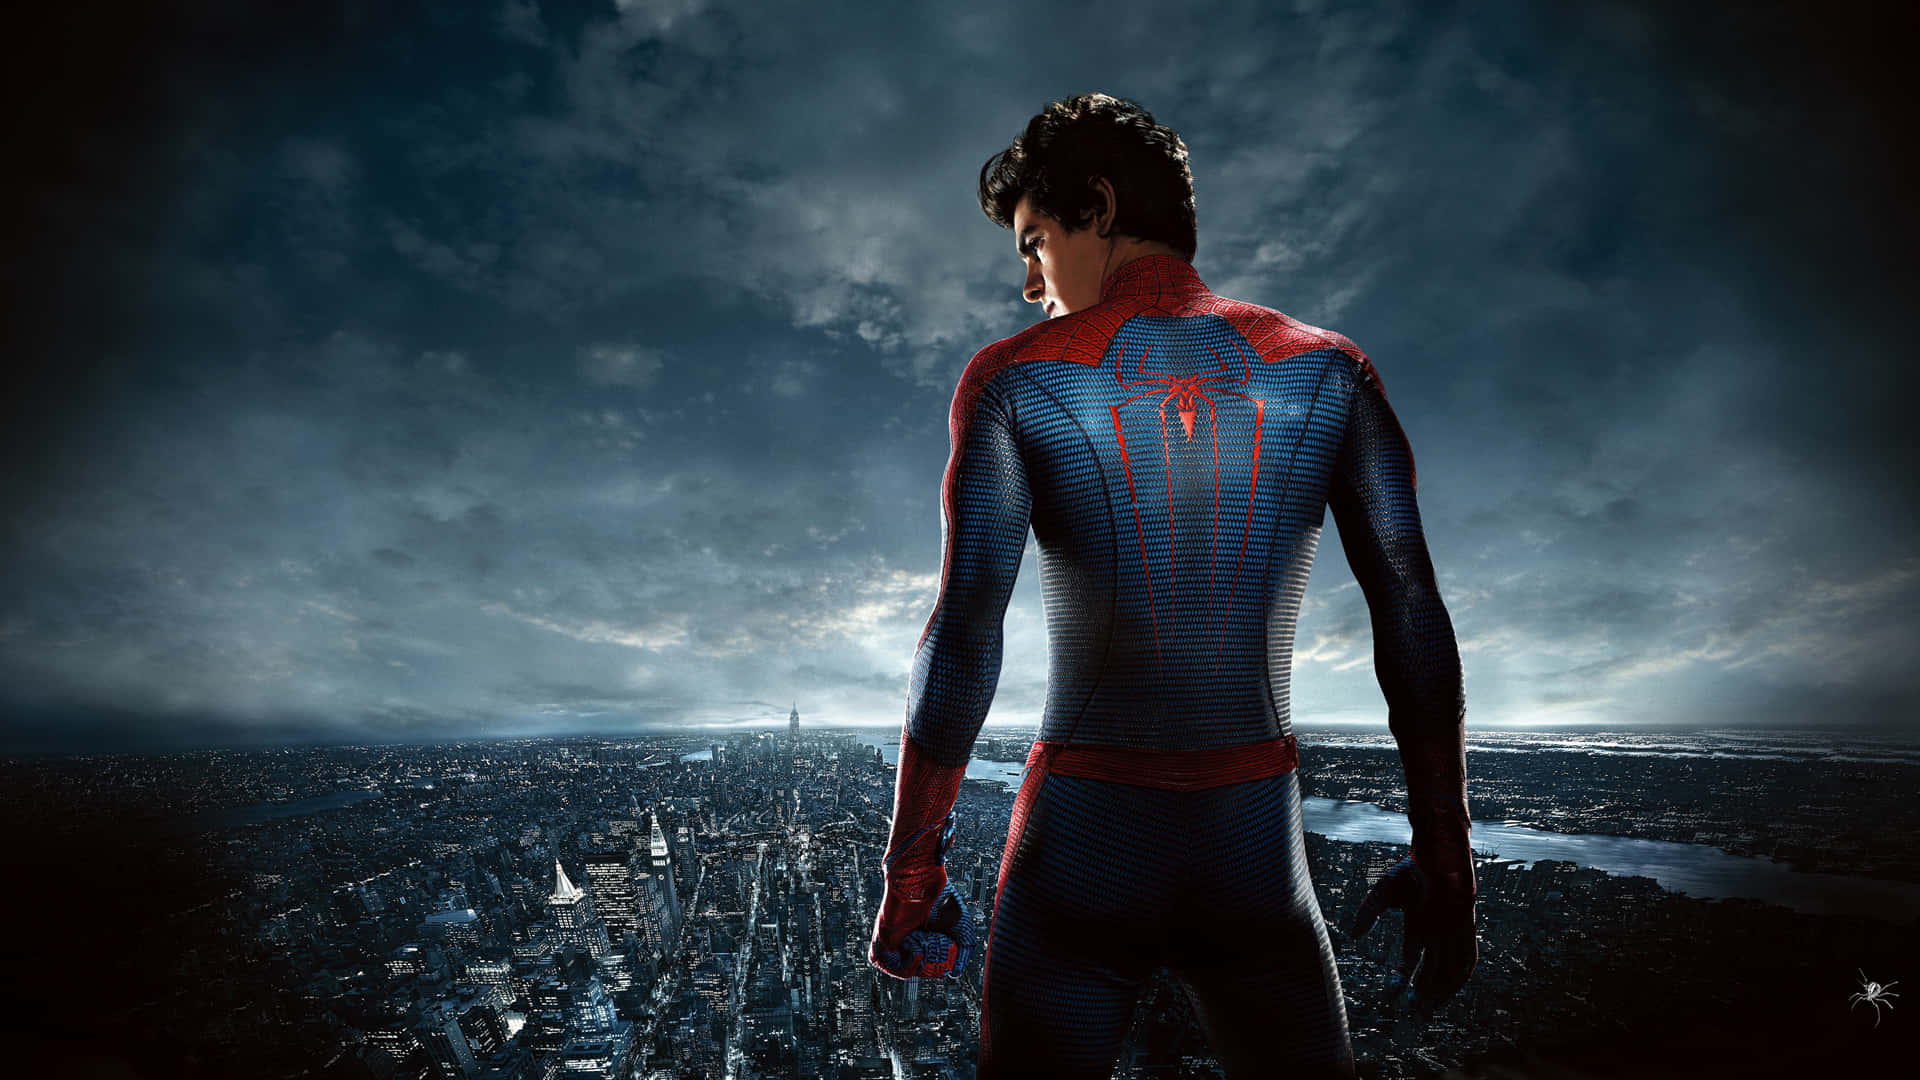 Free Spiderman Wallpaper Downloads, [500+] Spiderman Wallpapers for FREE |  